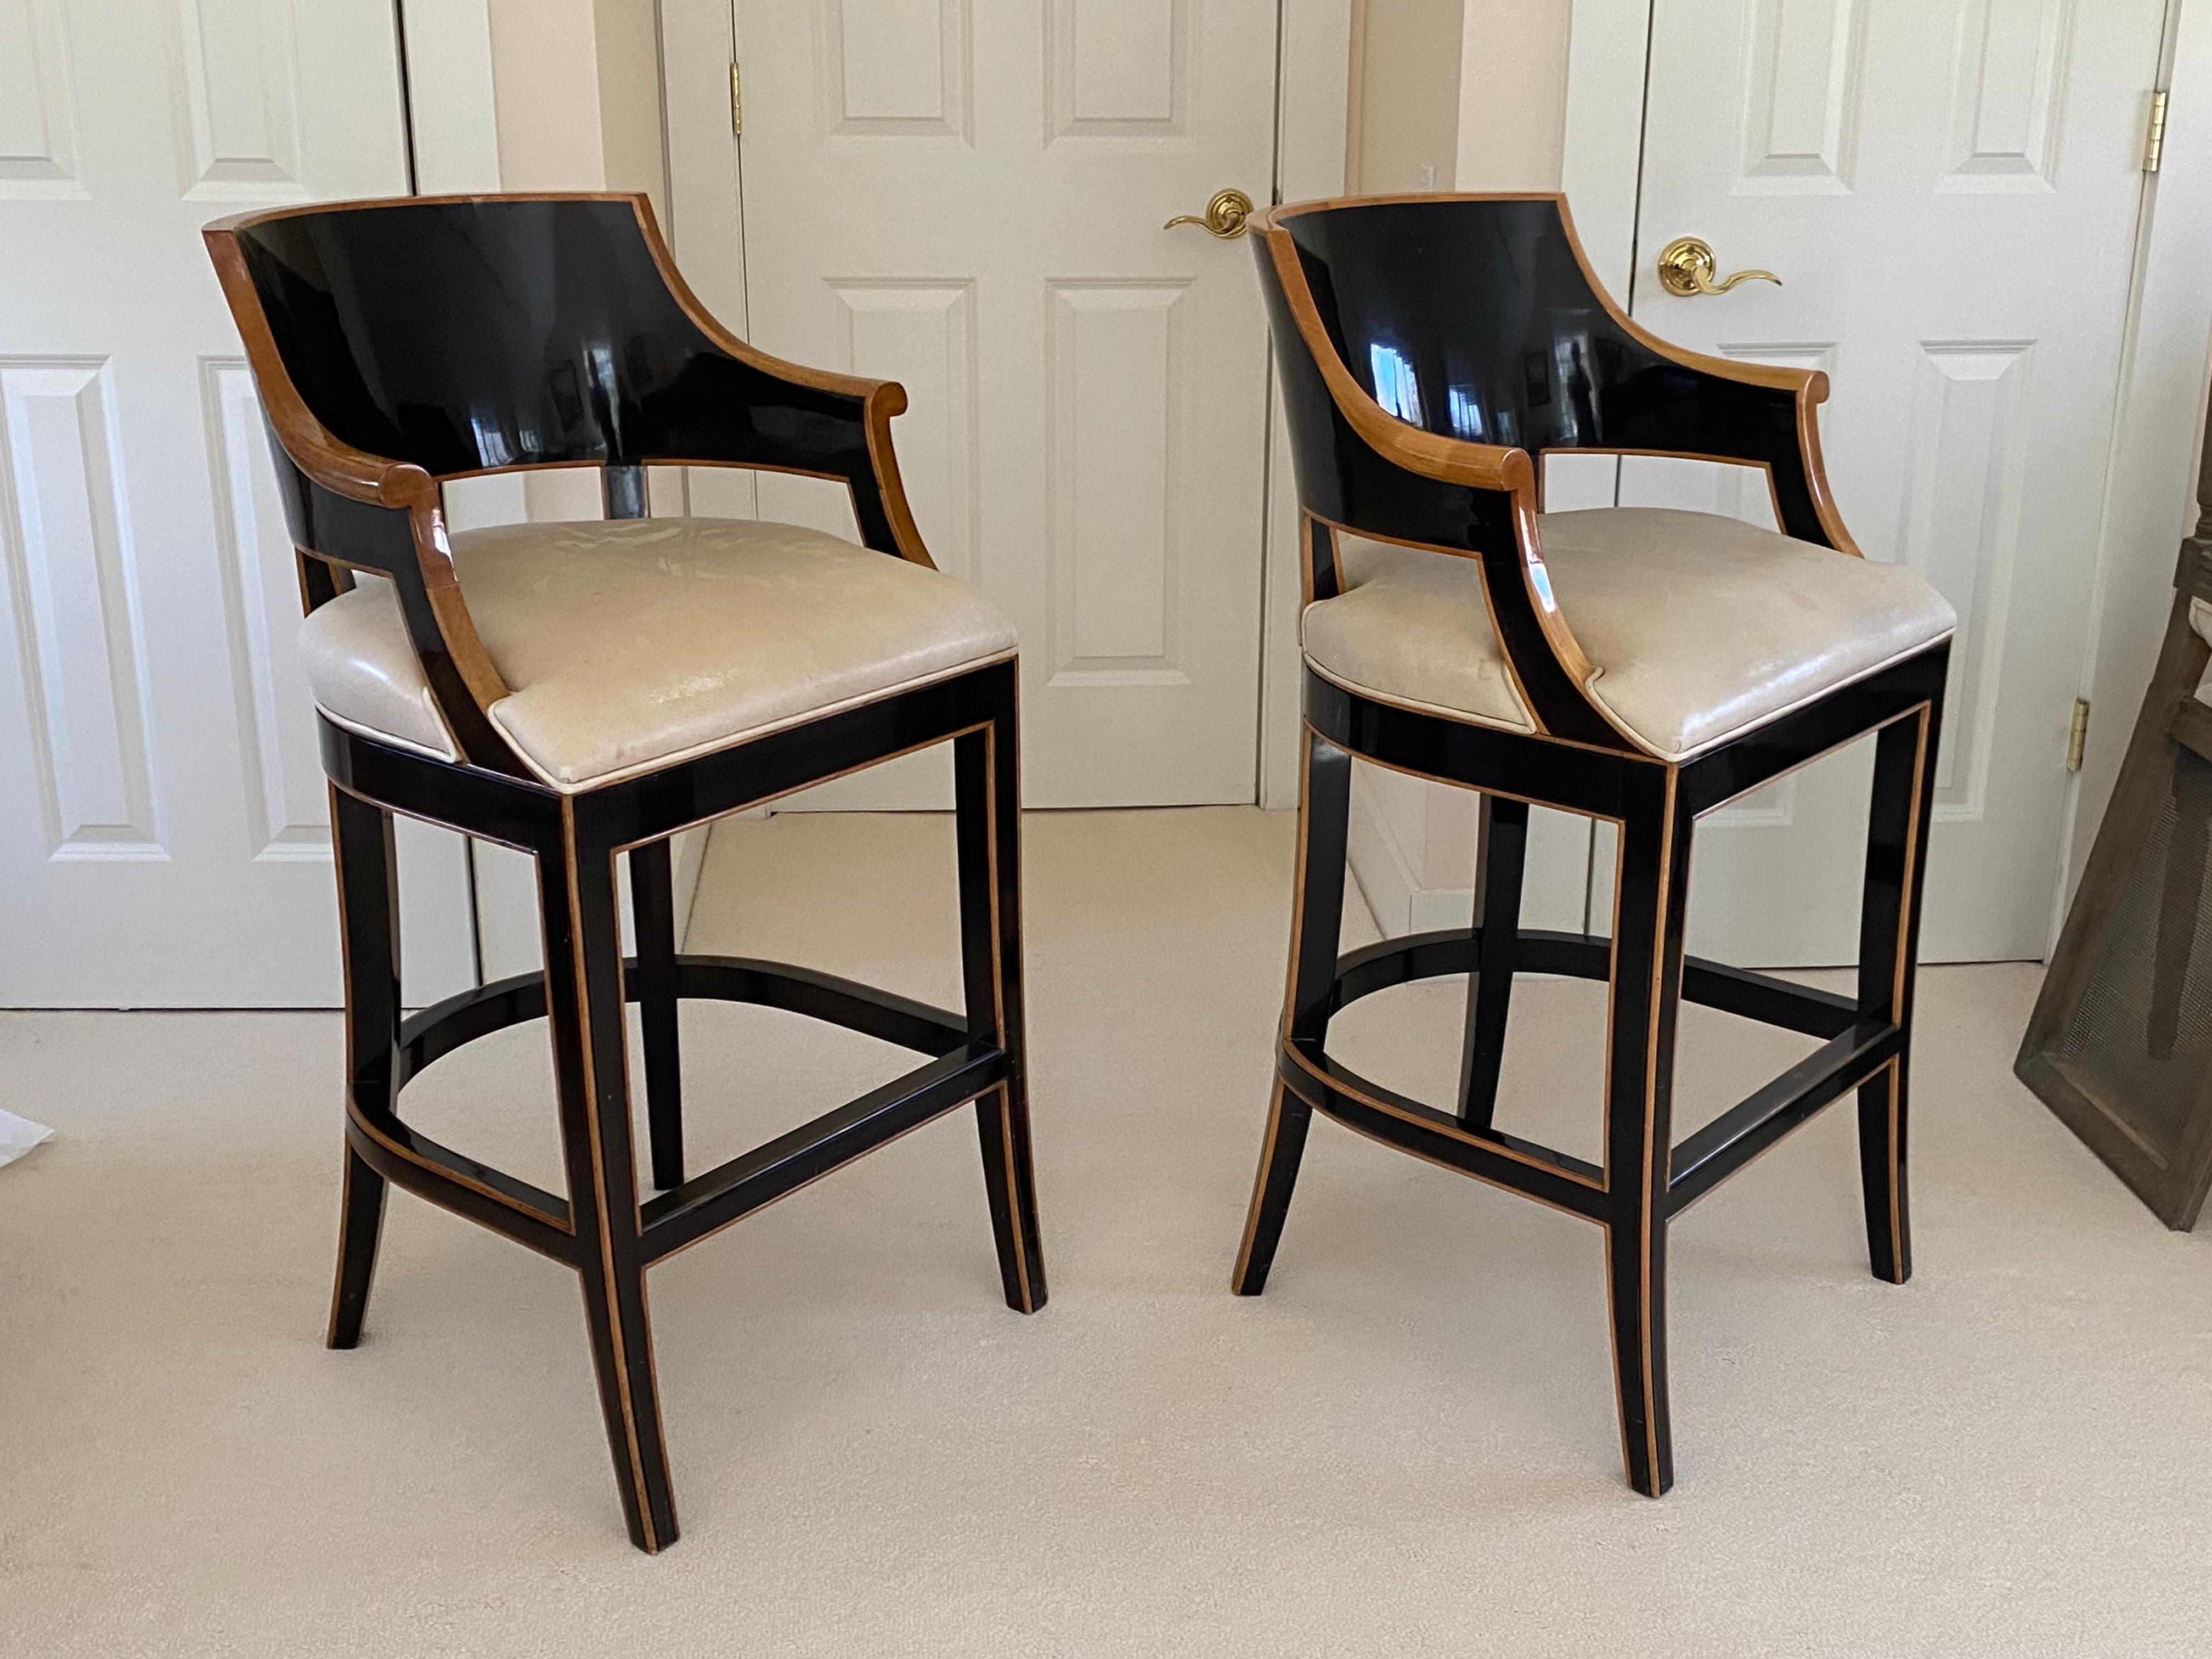 Pair of Gregorius Pineo 'Betty Bar Stool' in Light Walnut & Ebony Finishes.
An elegant pair of bar stools for a refined space. The warm light walnut finish contrasted with the ebony finish on walnut is gorgeous. The soft white leather on the seats